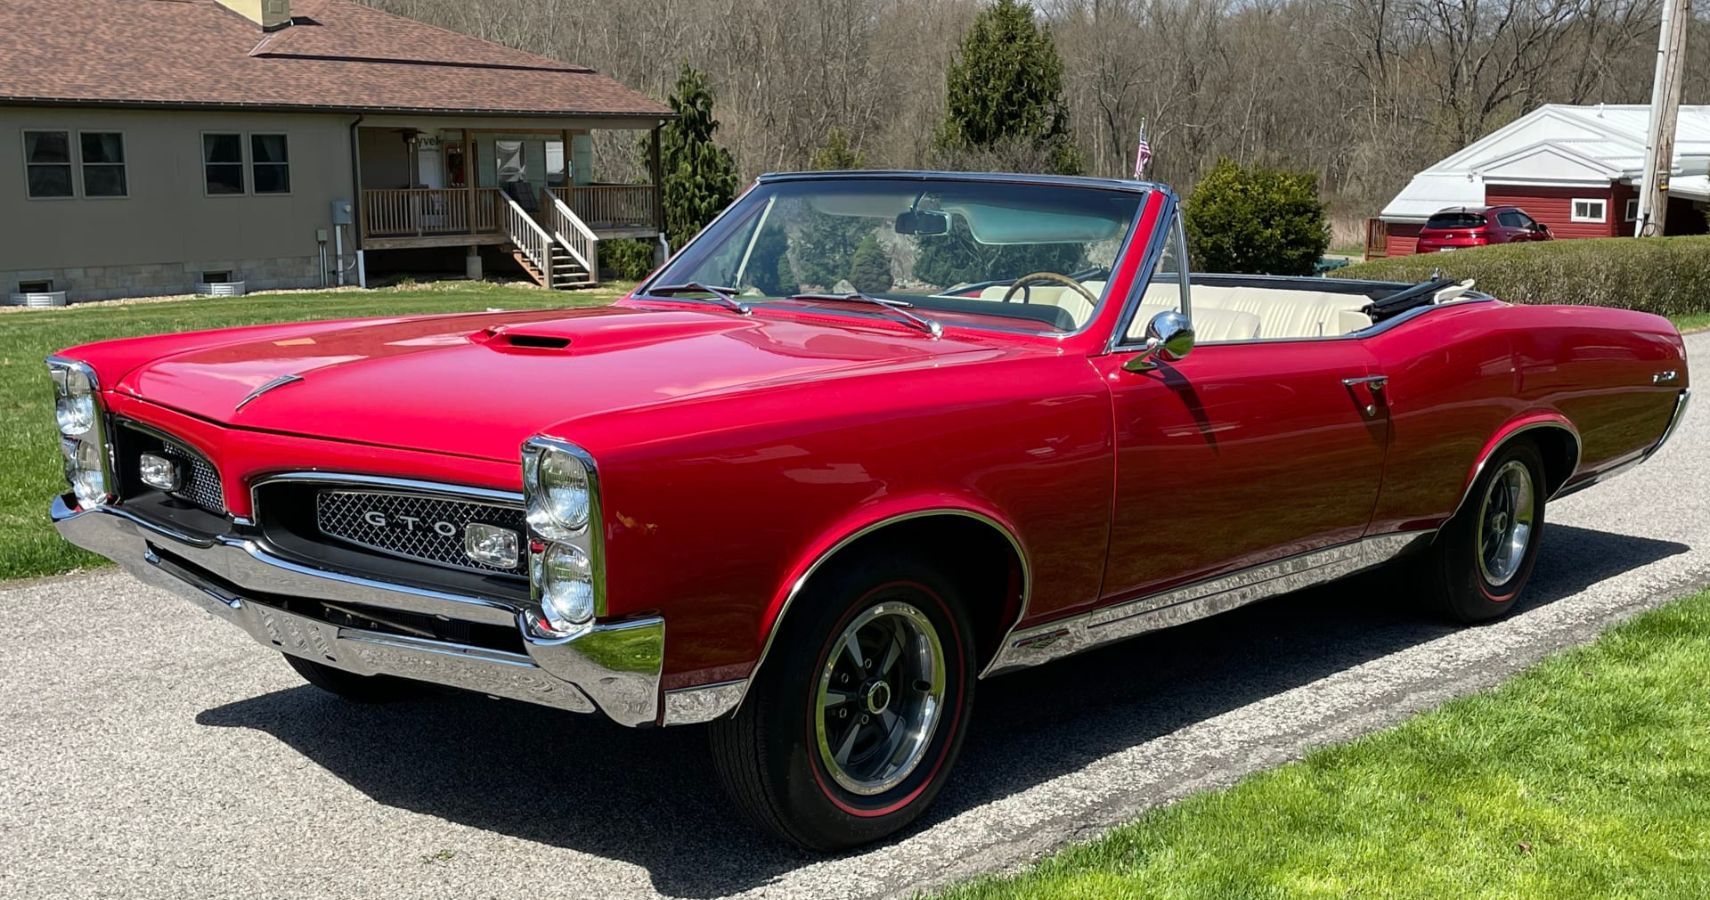 Red 1967 Pontiac GTO Convertible in Driveway